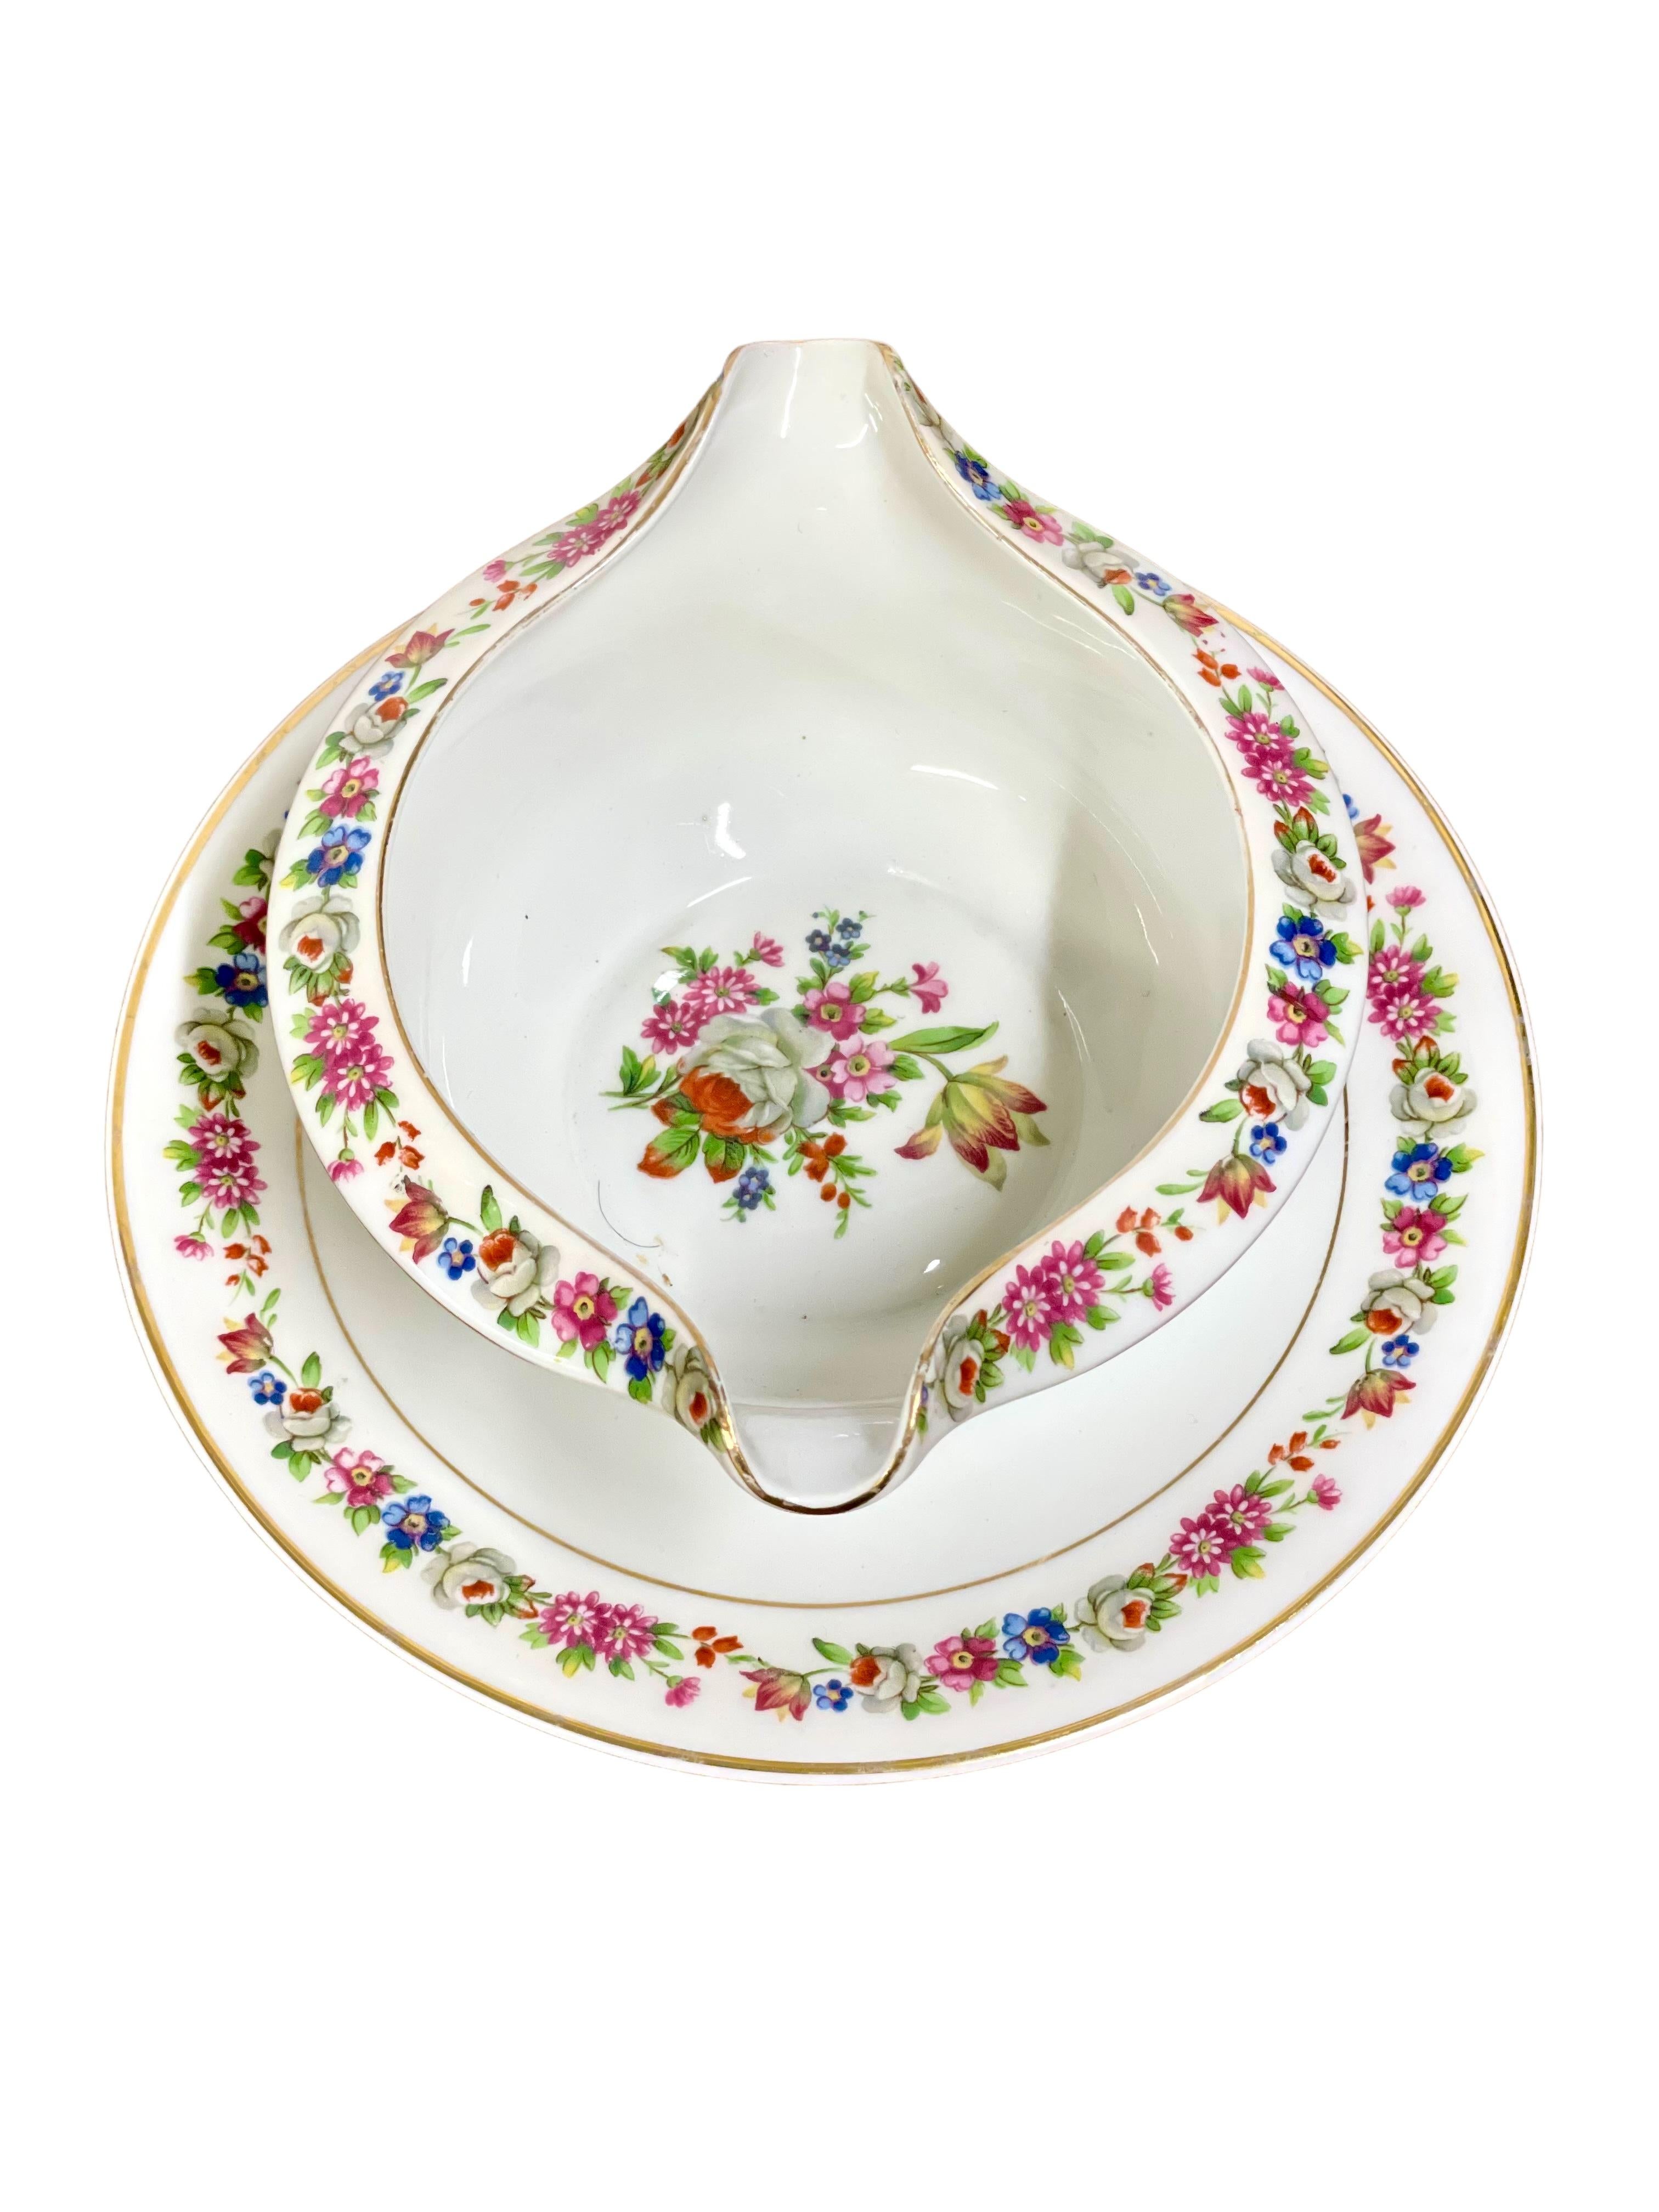 20th Century Dinner Service in Limoges Porcelain by Raynaud & Cie For Sale